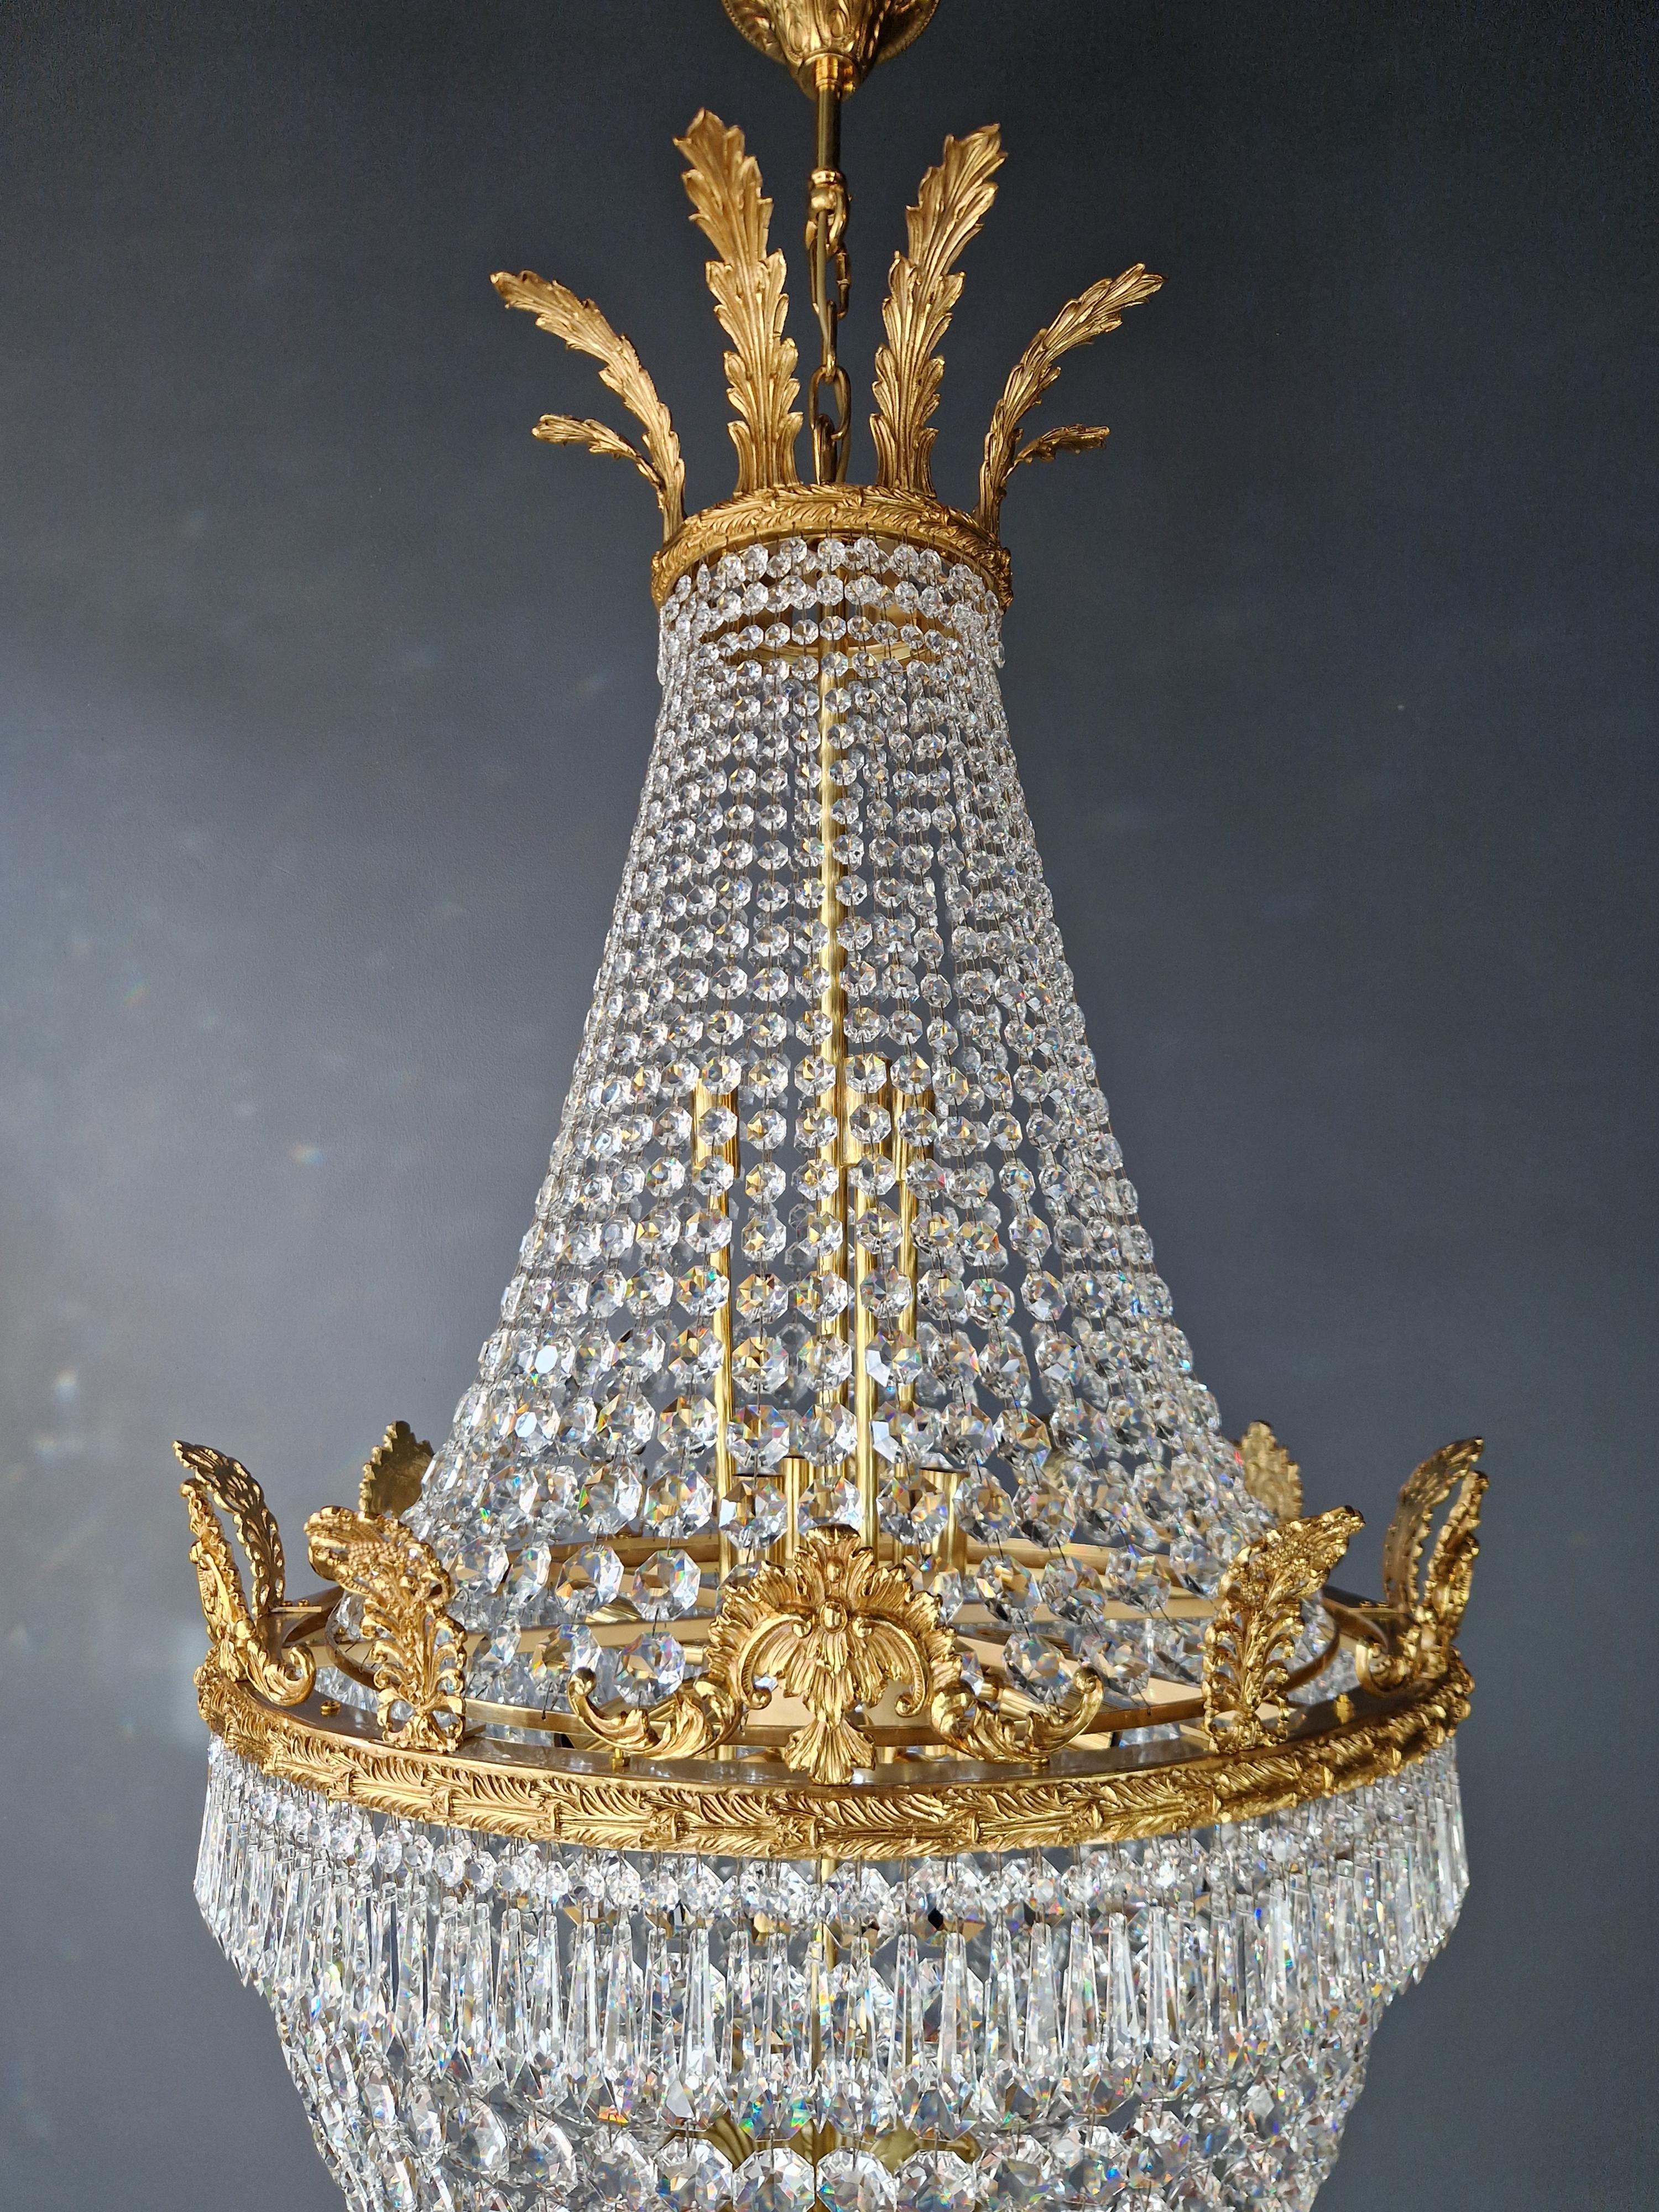 Brass Basket Empire Sac a Pearl Chandelier Crystal Lustre Lamp Antique Gold For Sale 4